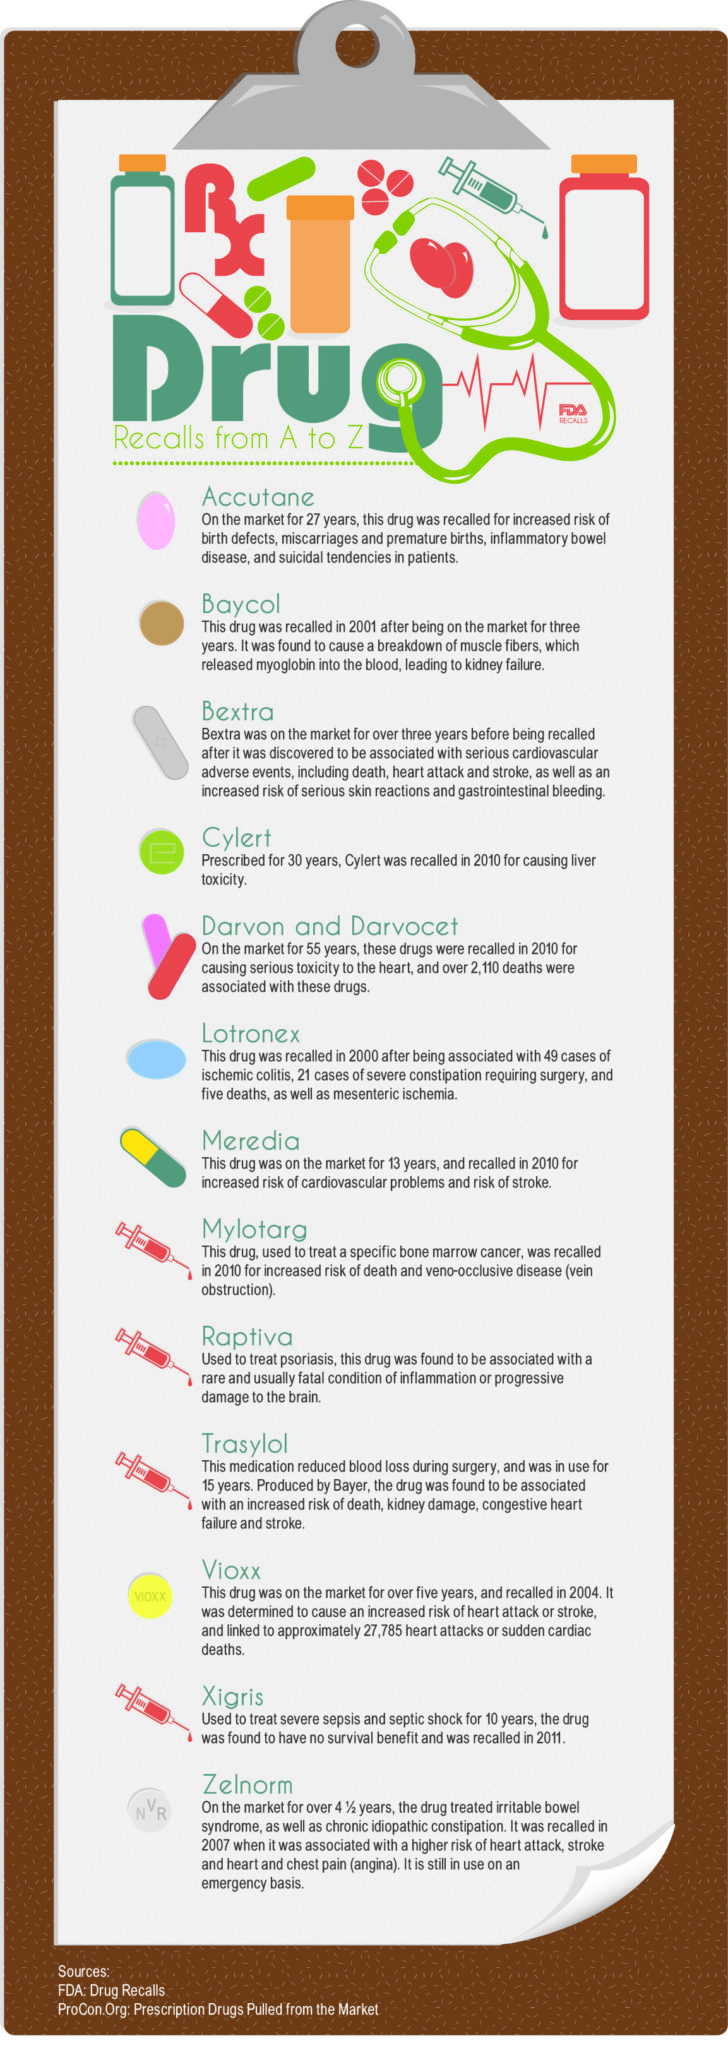 [INFOGRAPHIC] Drug Recalls A to Z